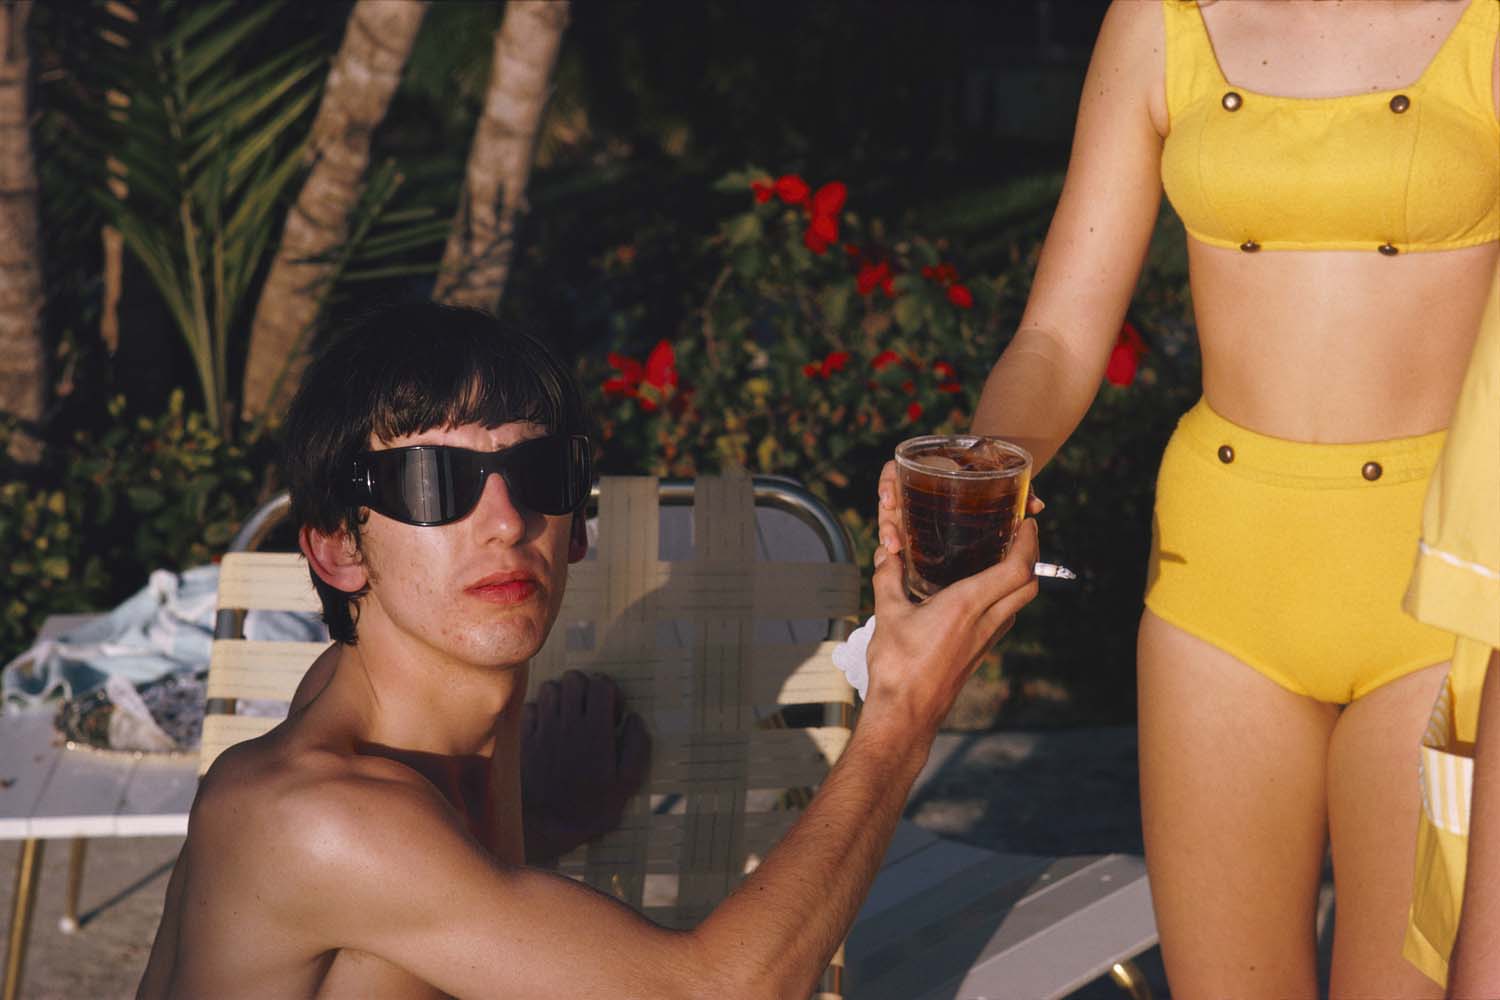 George looking young, handsome and relaxed. Living the life. Miami Beach, 1964. <span>© 1963-1964 Paul McCartney</span>